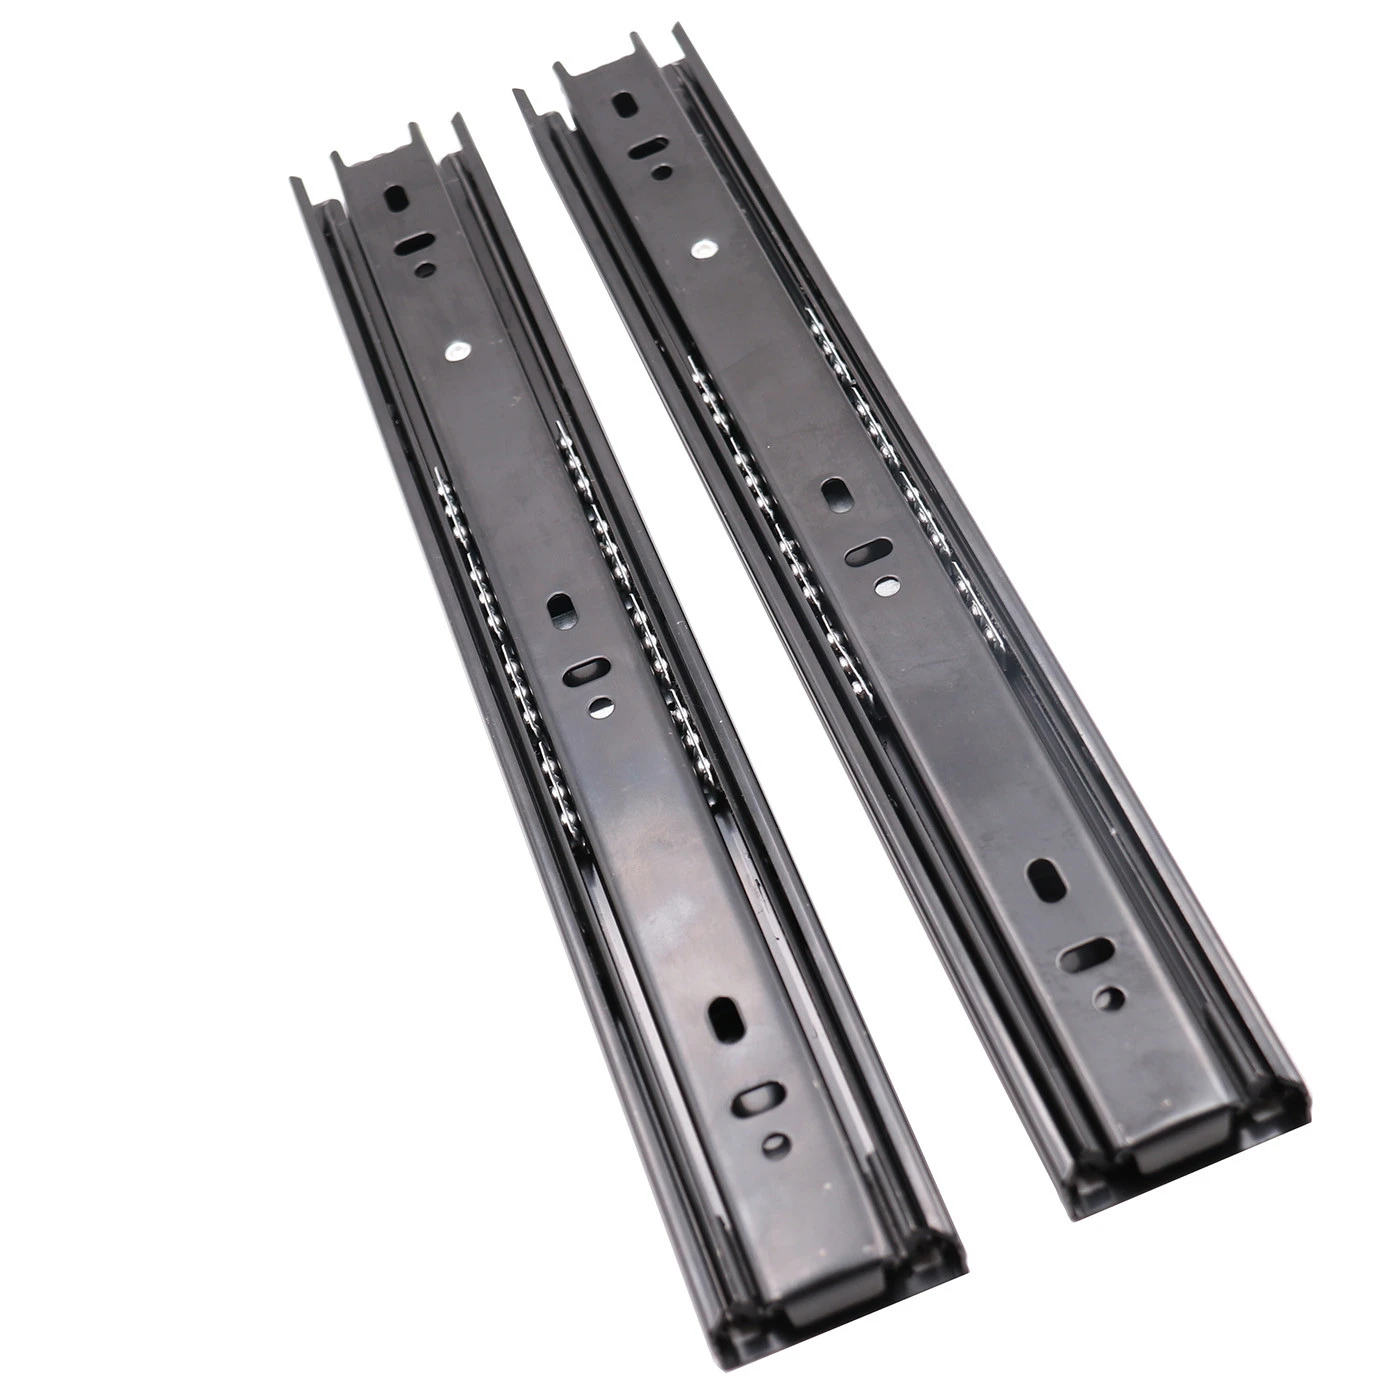 Cabinet slides Telescopic Channels Drawer Slides with Wedge